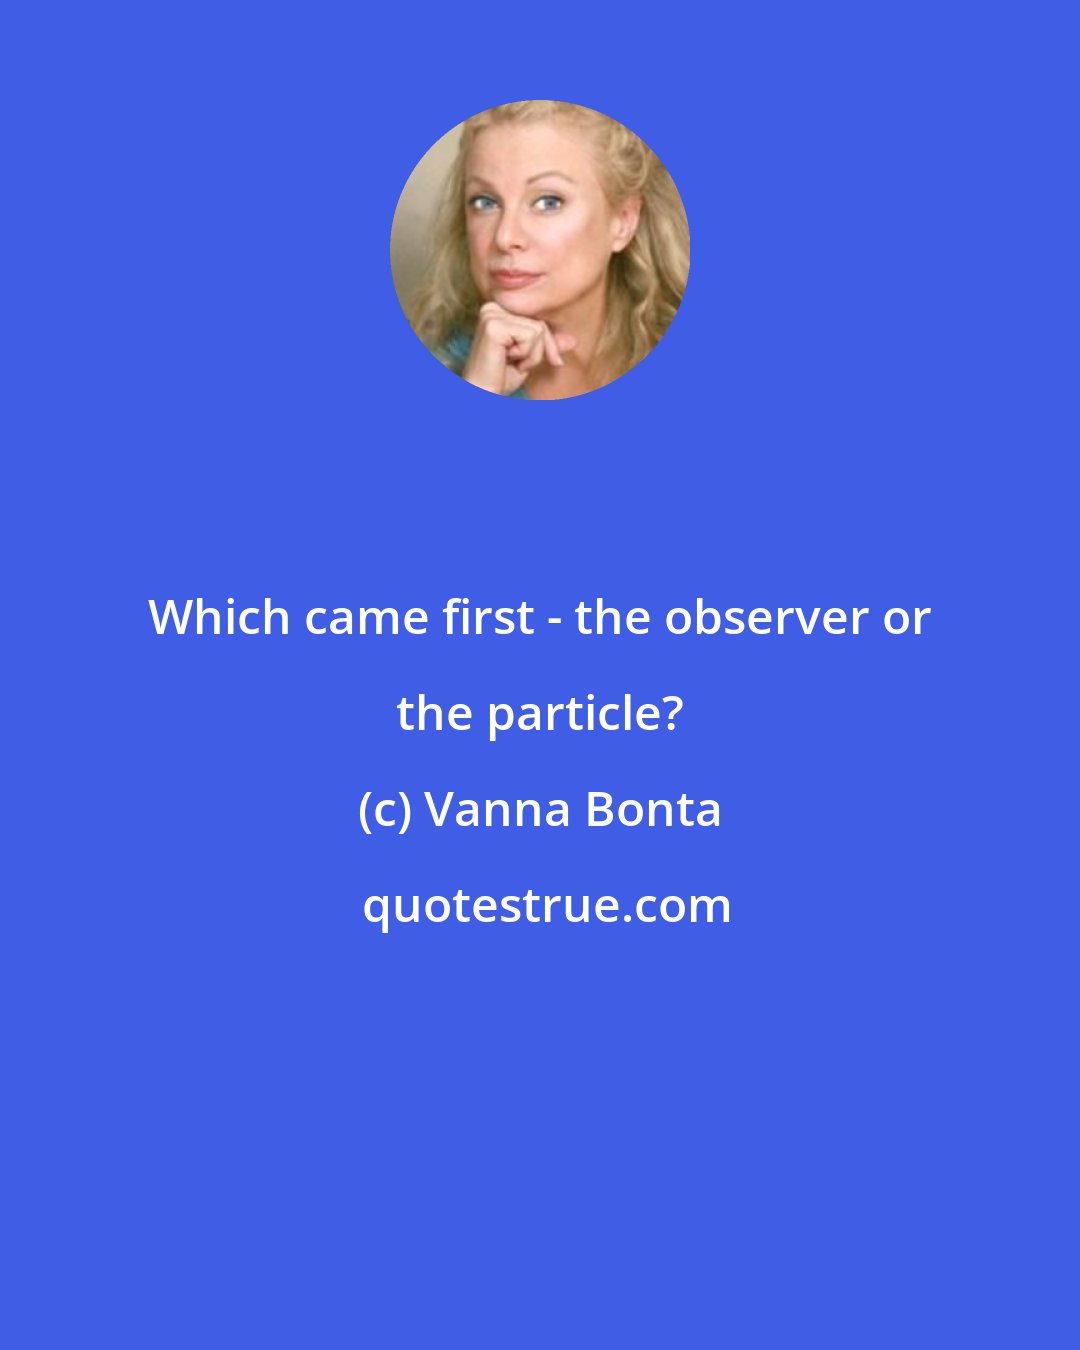 Vanna Bonta: Which came first - the observer or the particle?